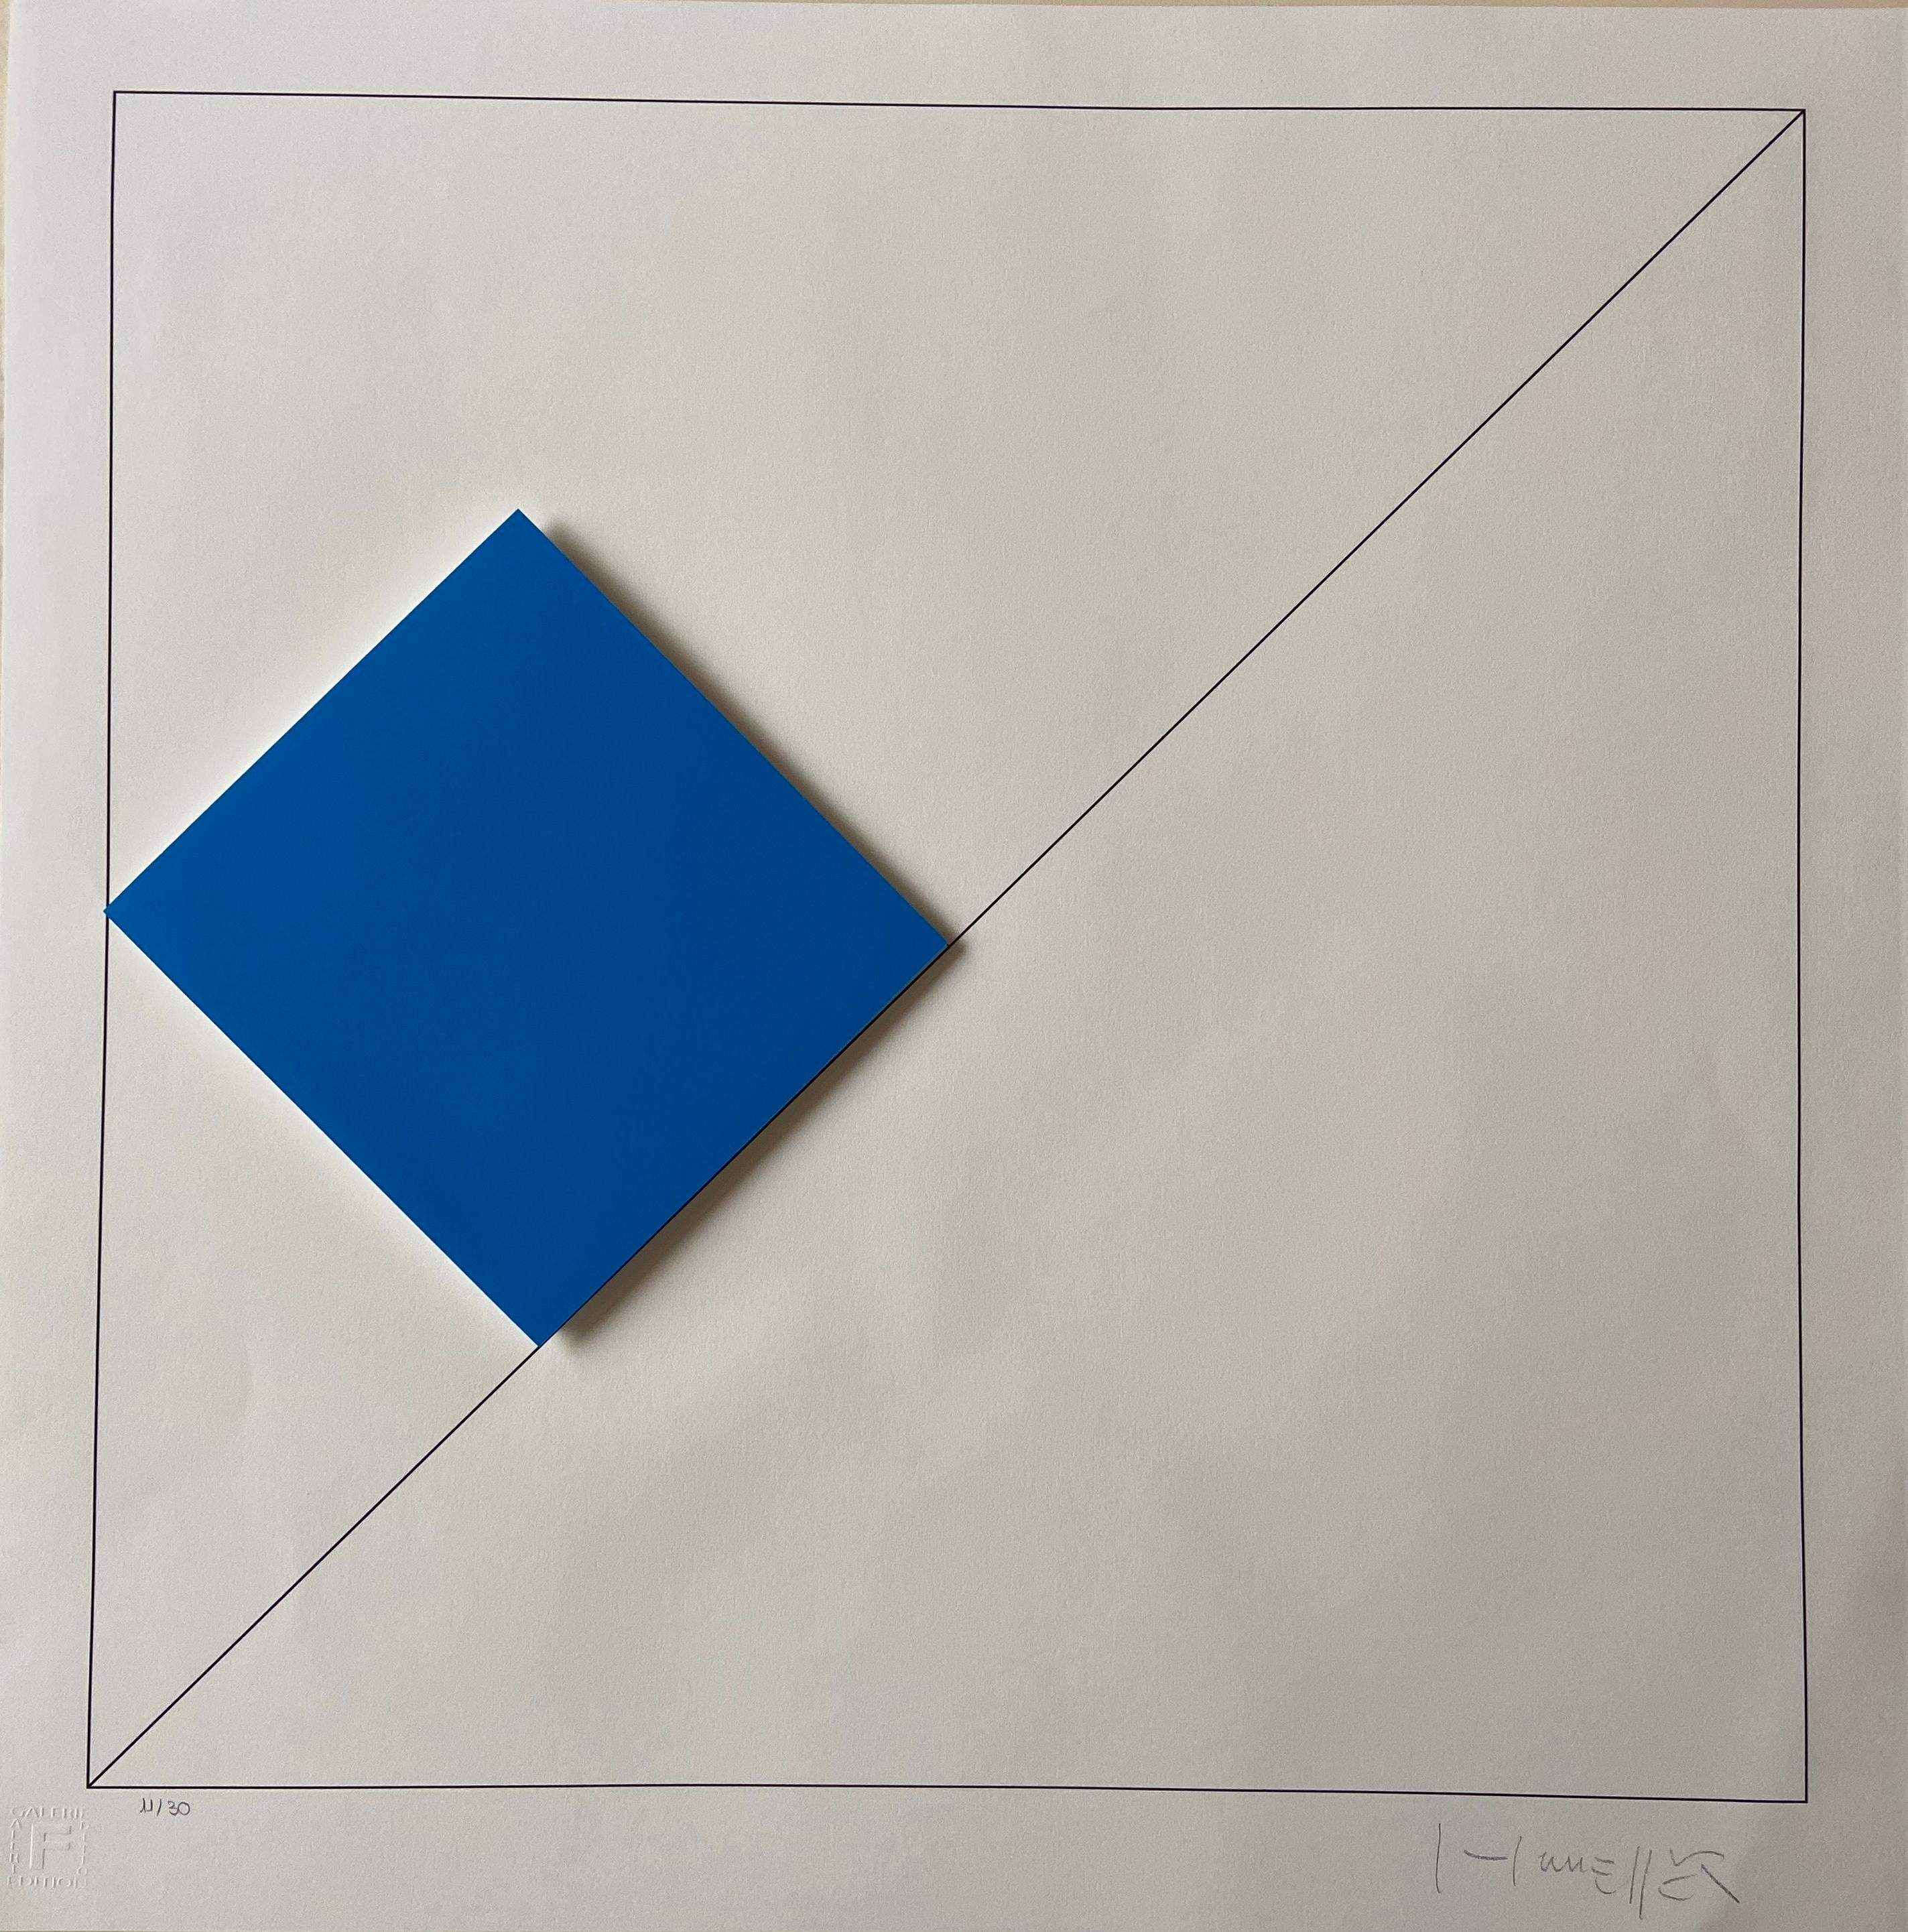 Gottfried Honegger
Composition 1 3D square (dark blue) 
2015
Silkscreen print signed in pencil and numbered on 30 copies by the artist.
Dry stamp of the publisher in the margin at the lower left corner.
Condition: excellent; the work has never been